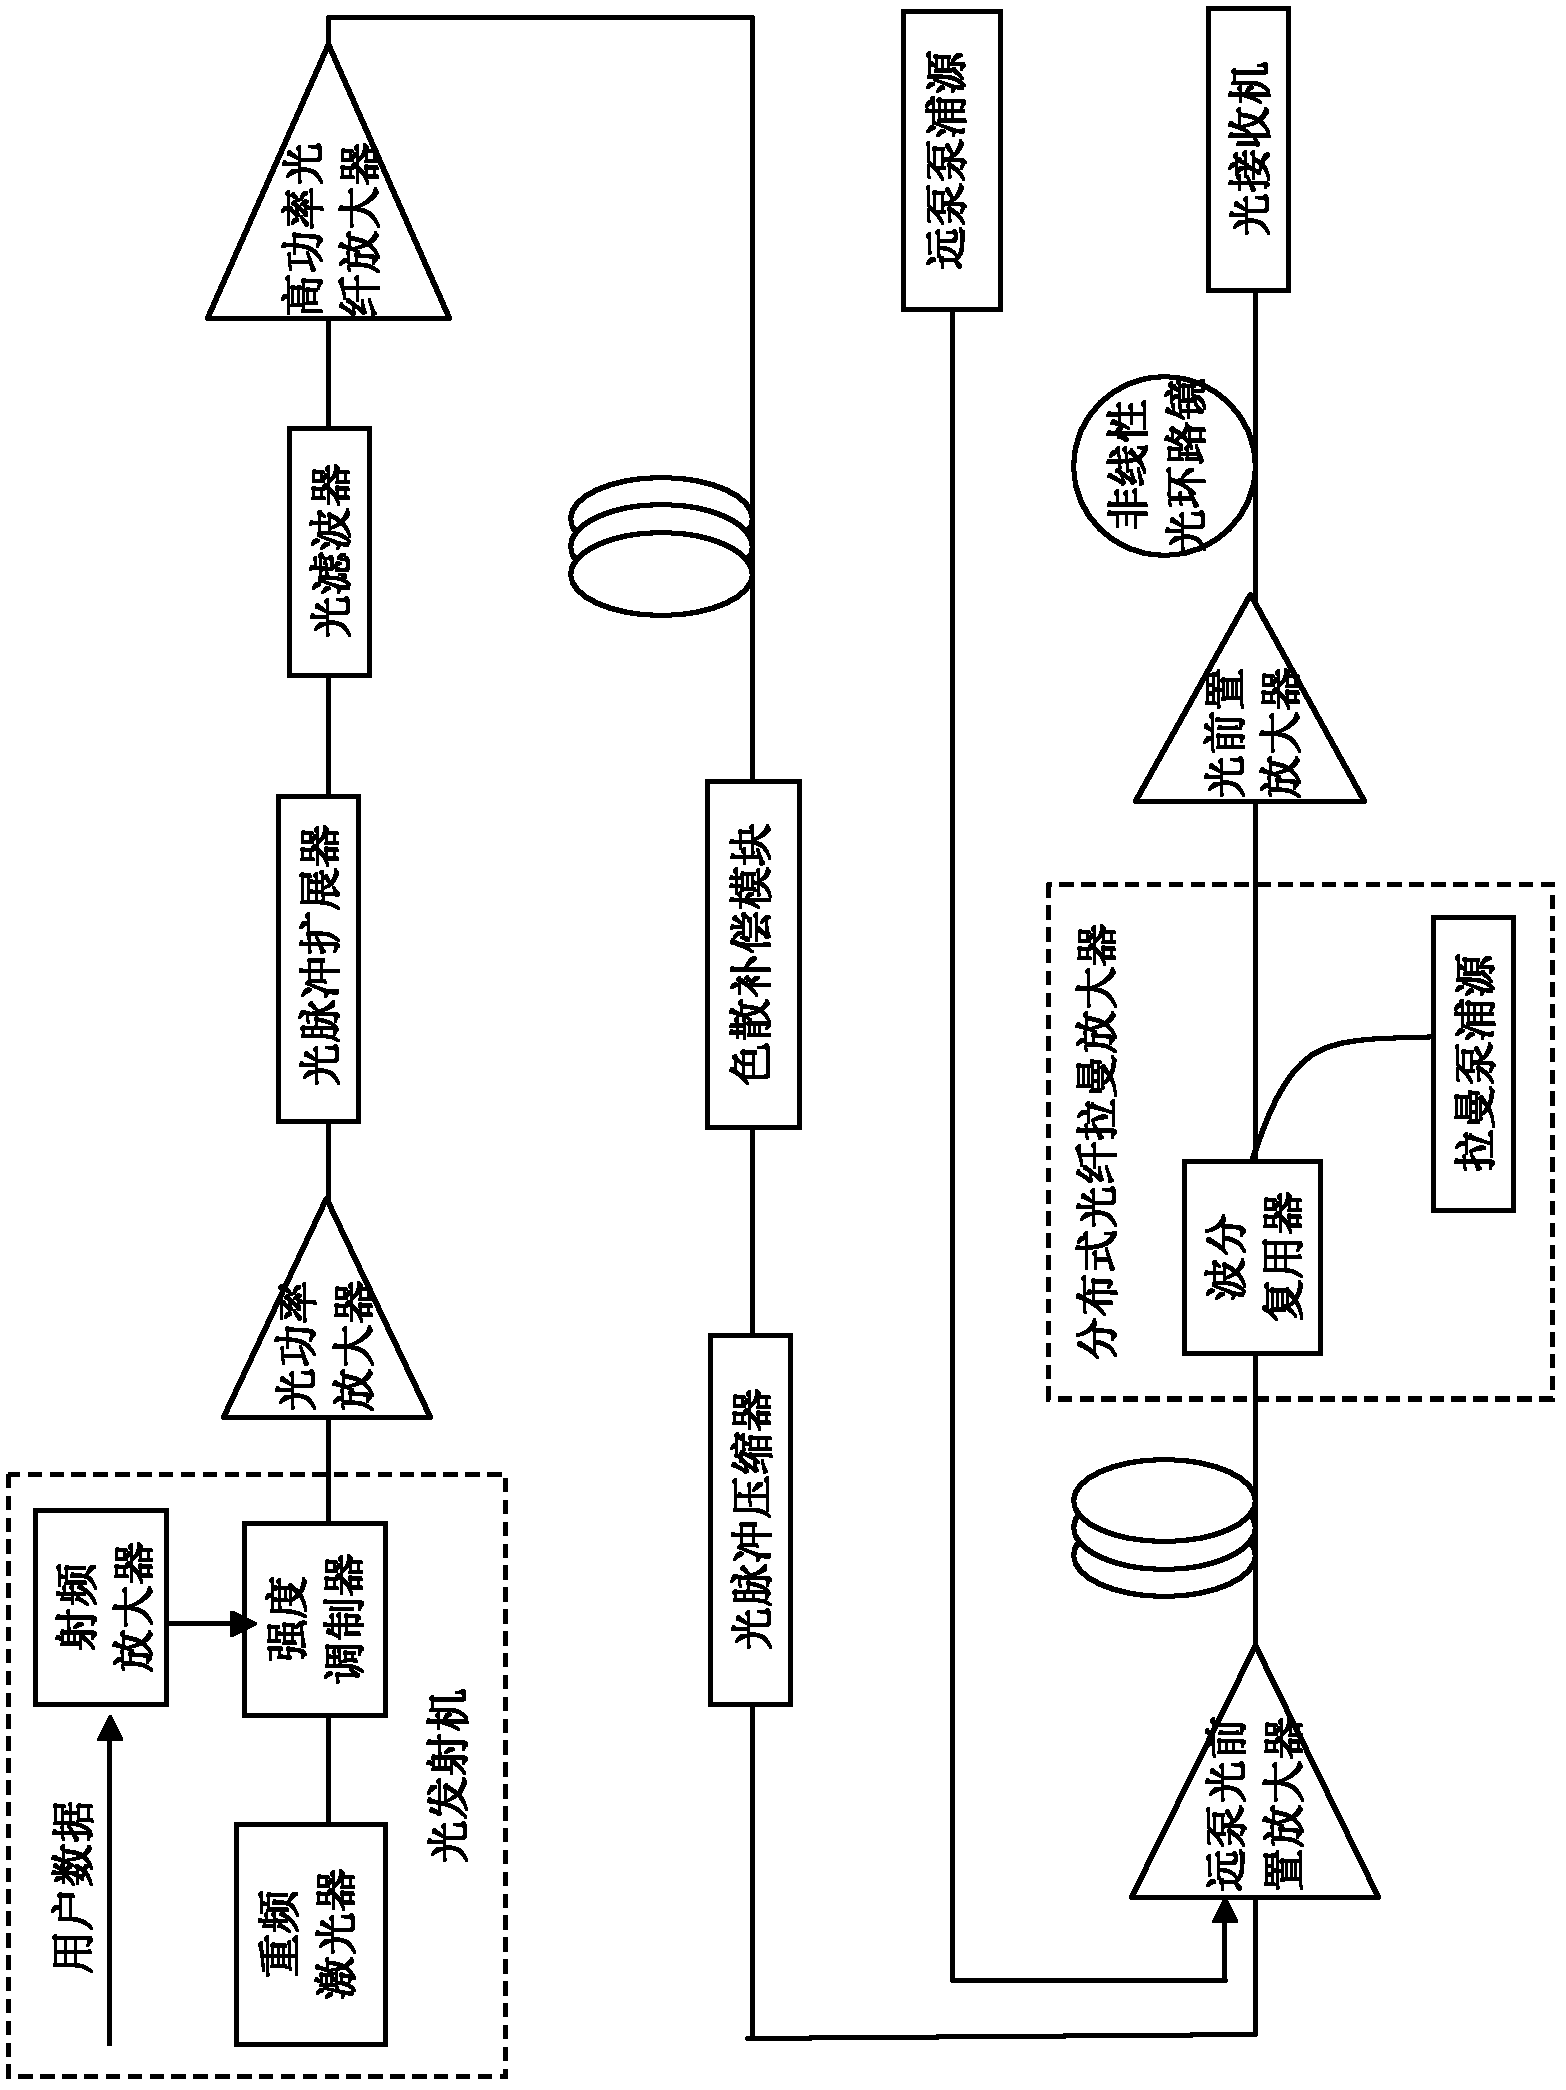 Non-relay optical fiber transmission system and method